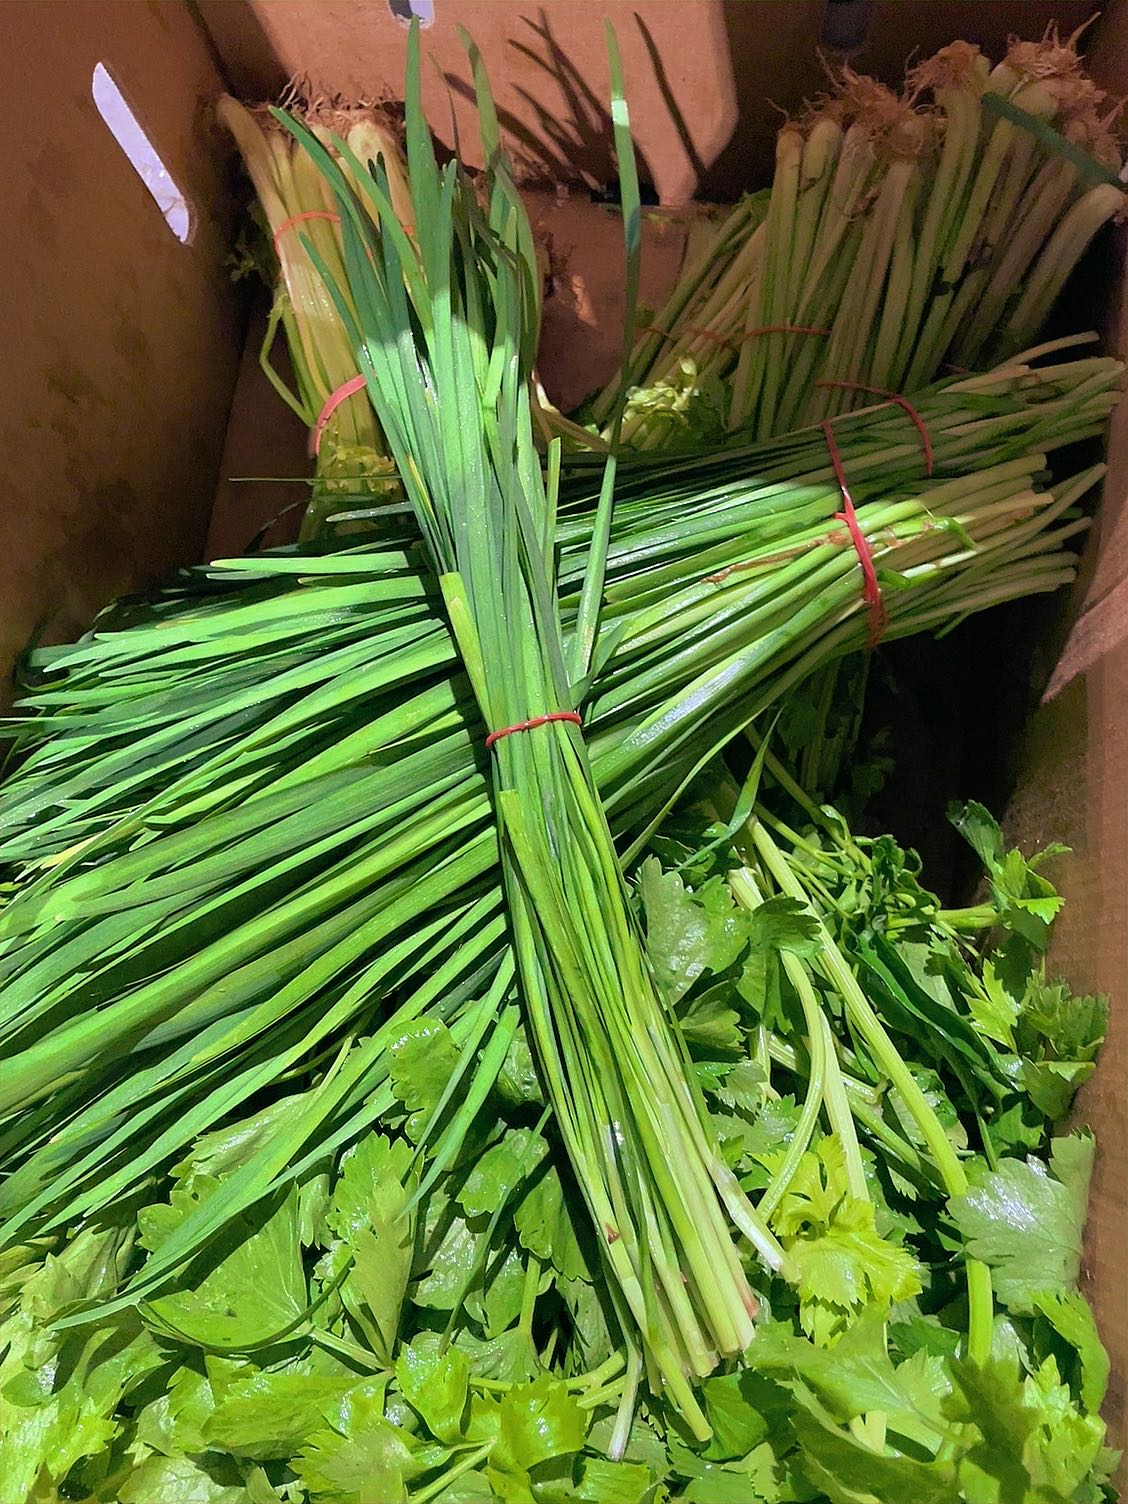 [Fresh]-Bundle-of-Chives---Pack-of-2-1